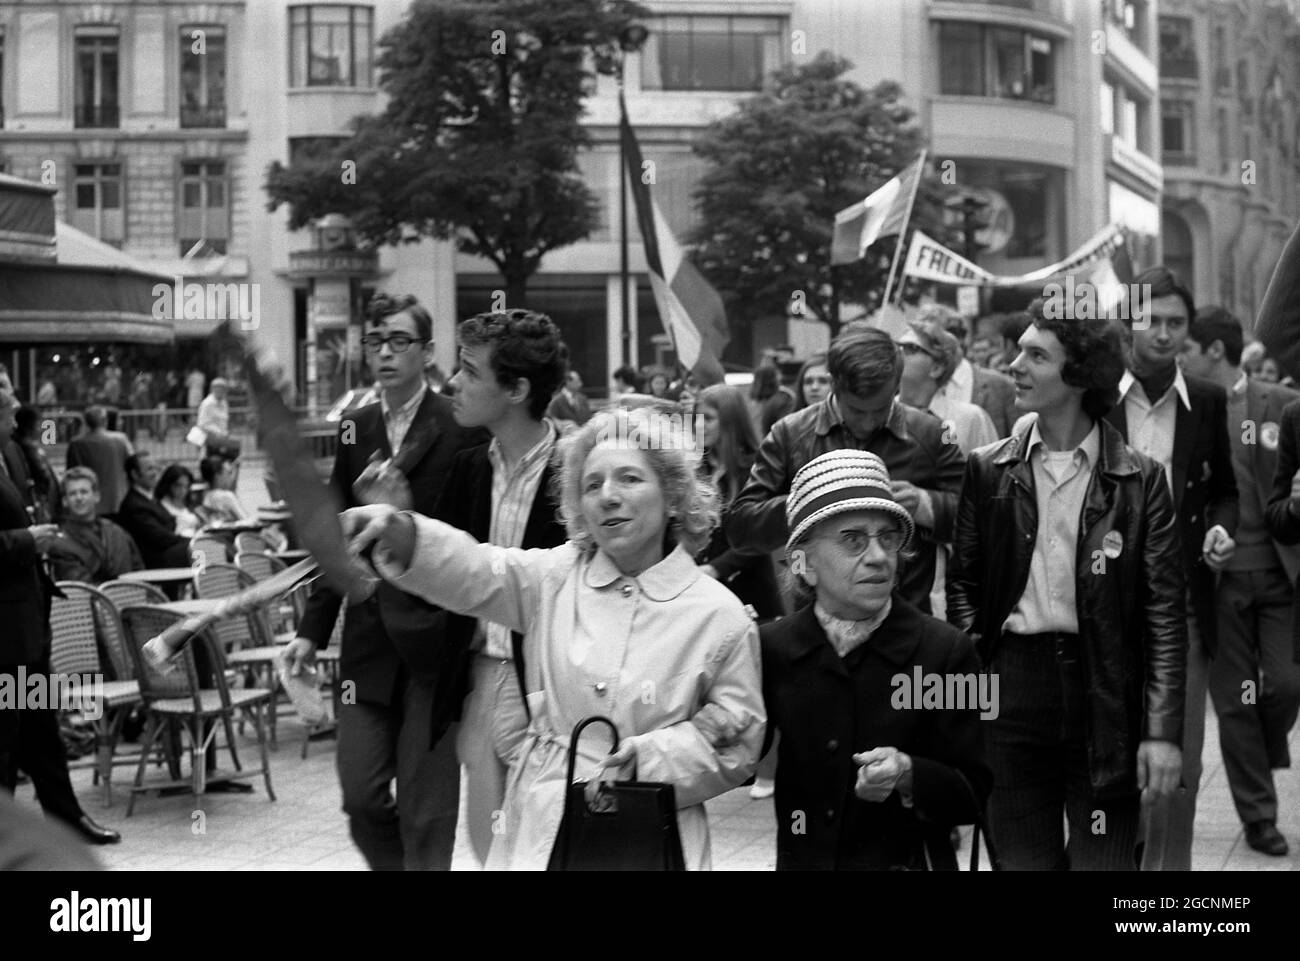 AJAXNETPHOTO. JUNE, 1969. PARIS, FRANCE. - STUDENT STREET DEMO - PHARMACEUTICAL UNIVERSITY FACULTY STUDENTS PROTEST ON THE CITY STREETS AGAINST NEW REGULATIONS BARRING THEM FROM HOSPITAL PRACTICE.PHOTO:JONATHAN EASTLAND/AJAX REF:692206040 Stock Photo